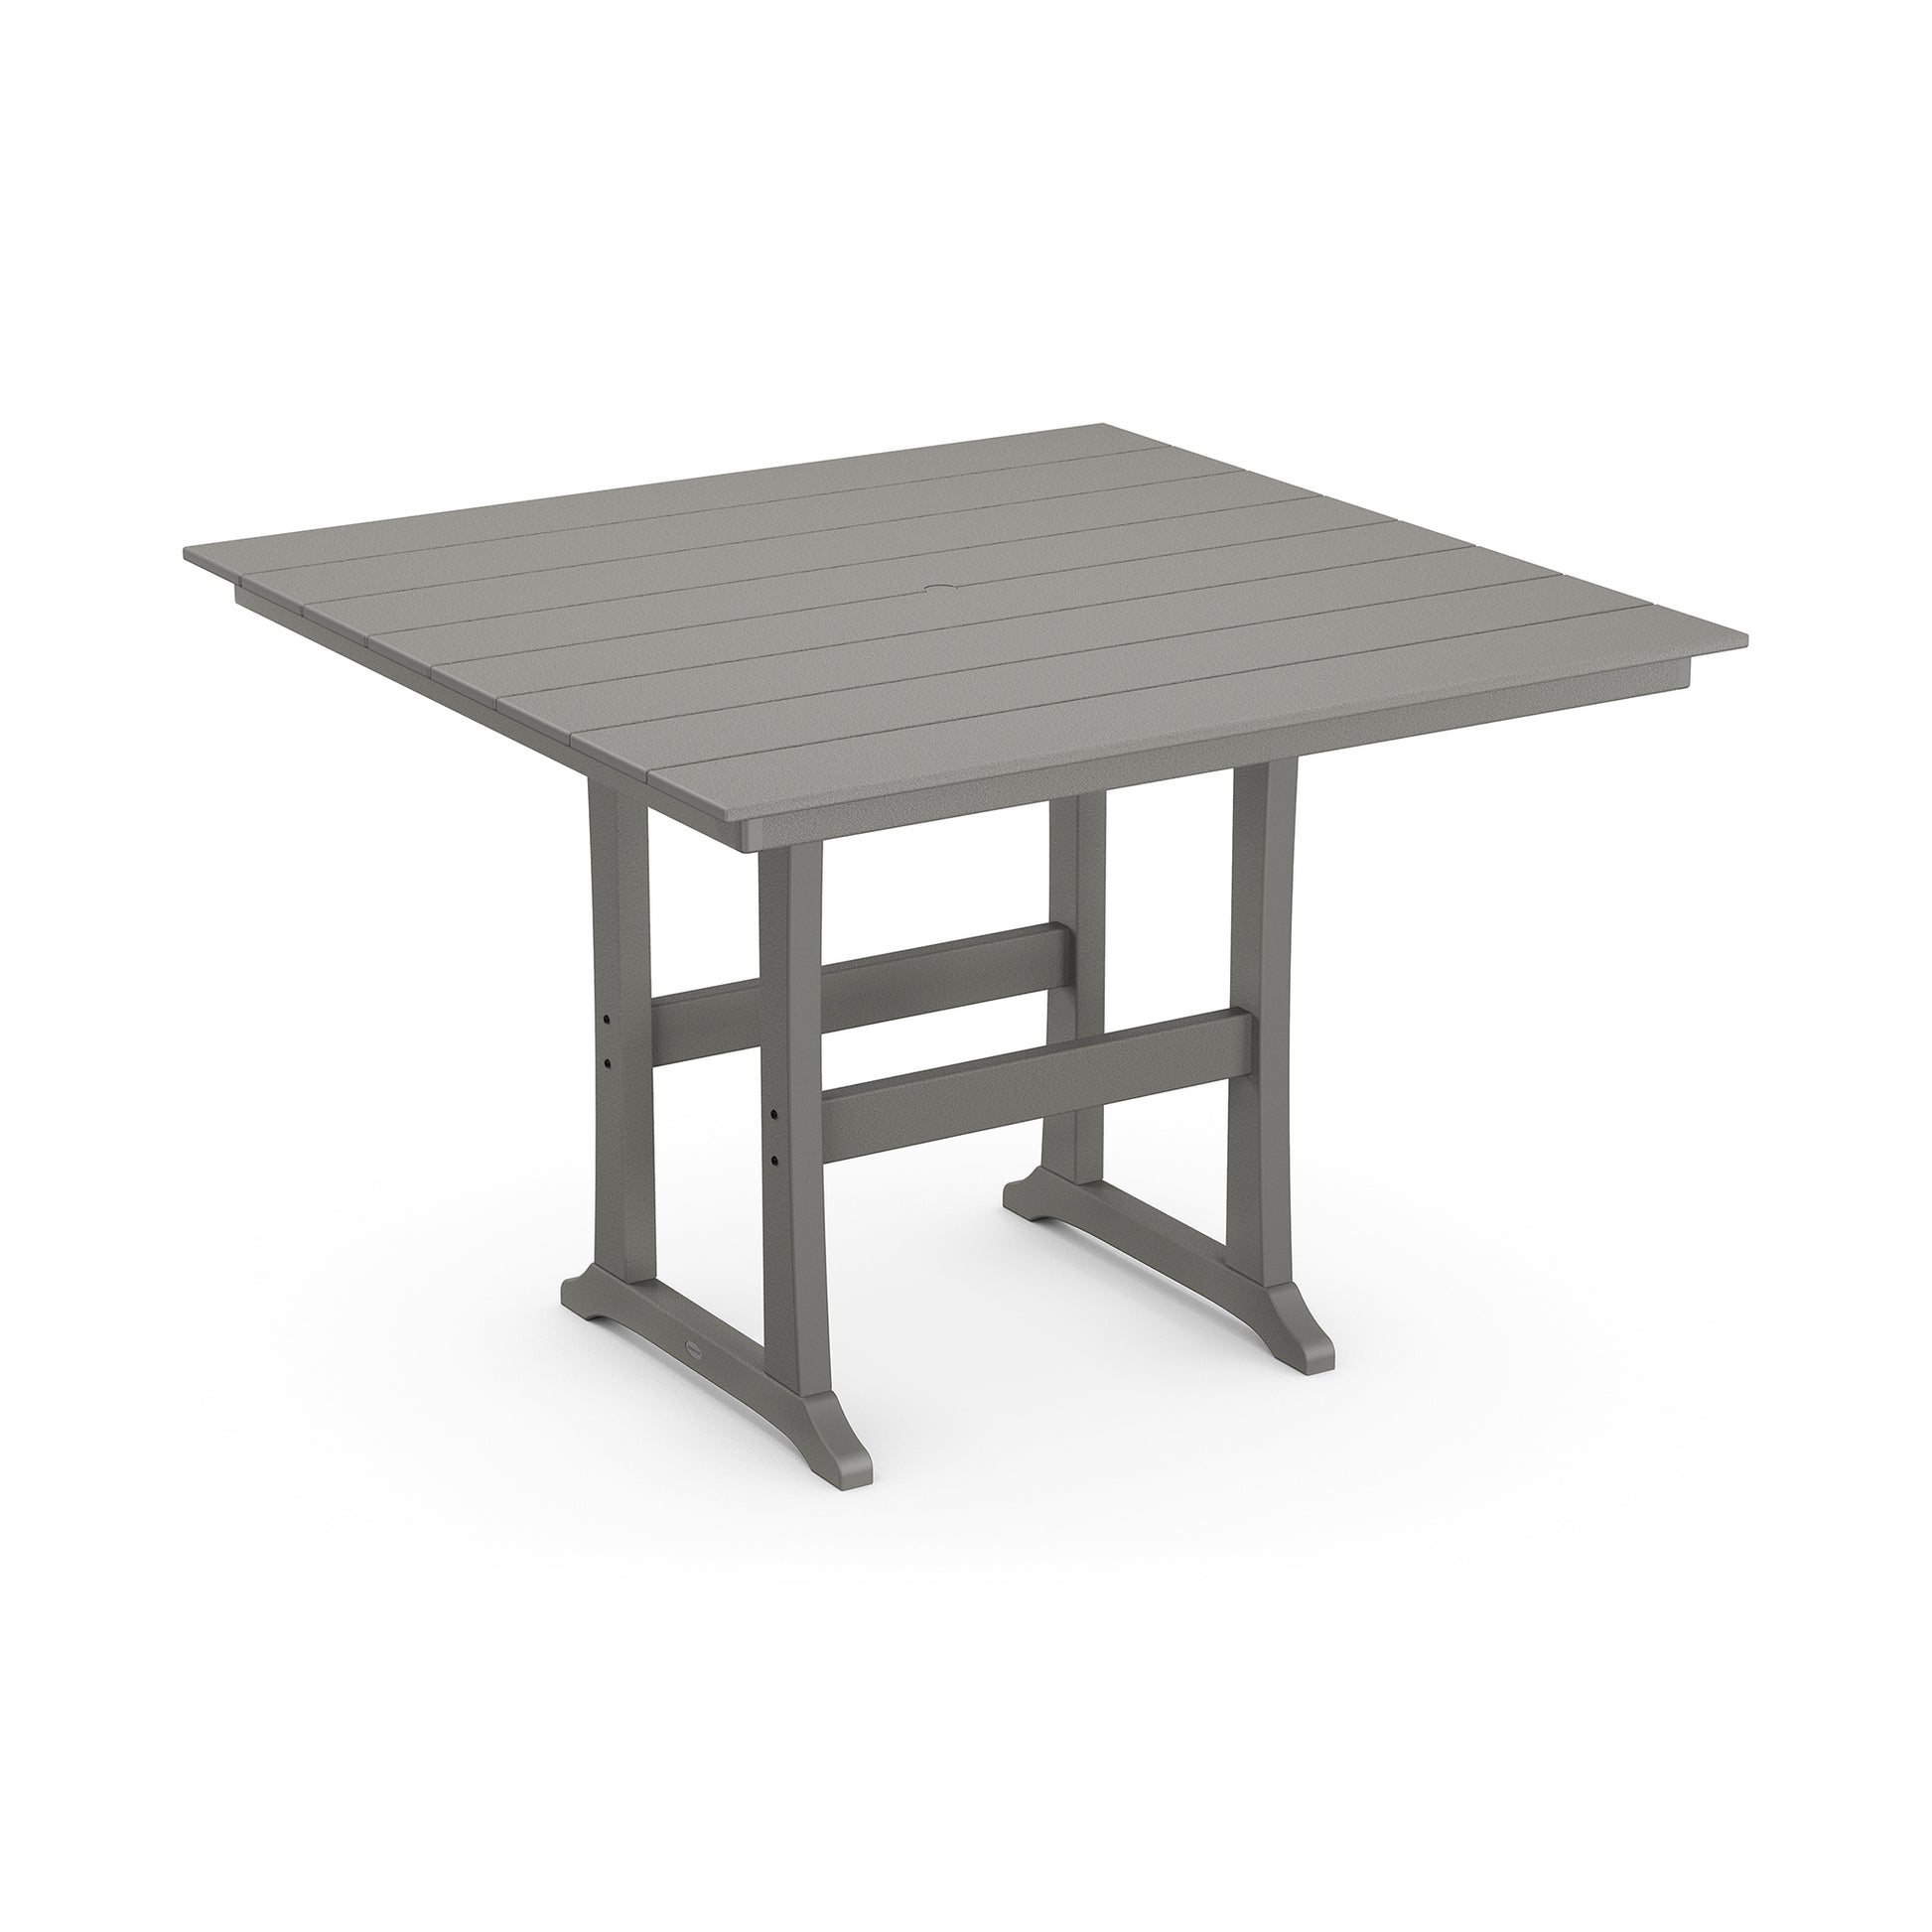 A minimalist gray outdoor dining table made from POLYWOOD® Farmhouse Trestle 59" Bar Table lumber, featuring a slatted top and sturdy metal frame, set against a plain white background.